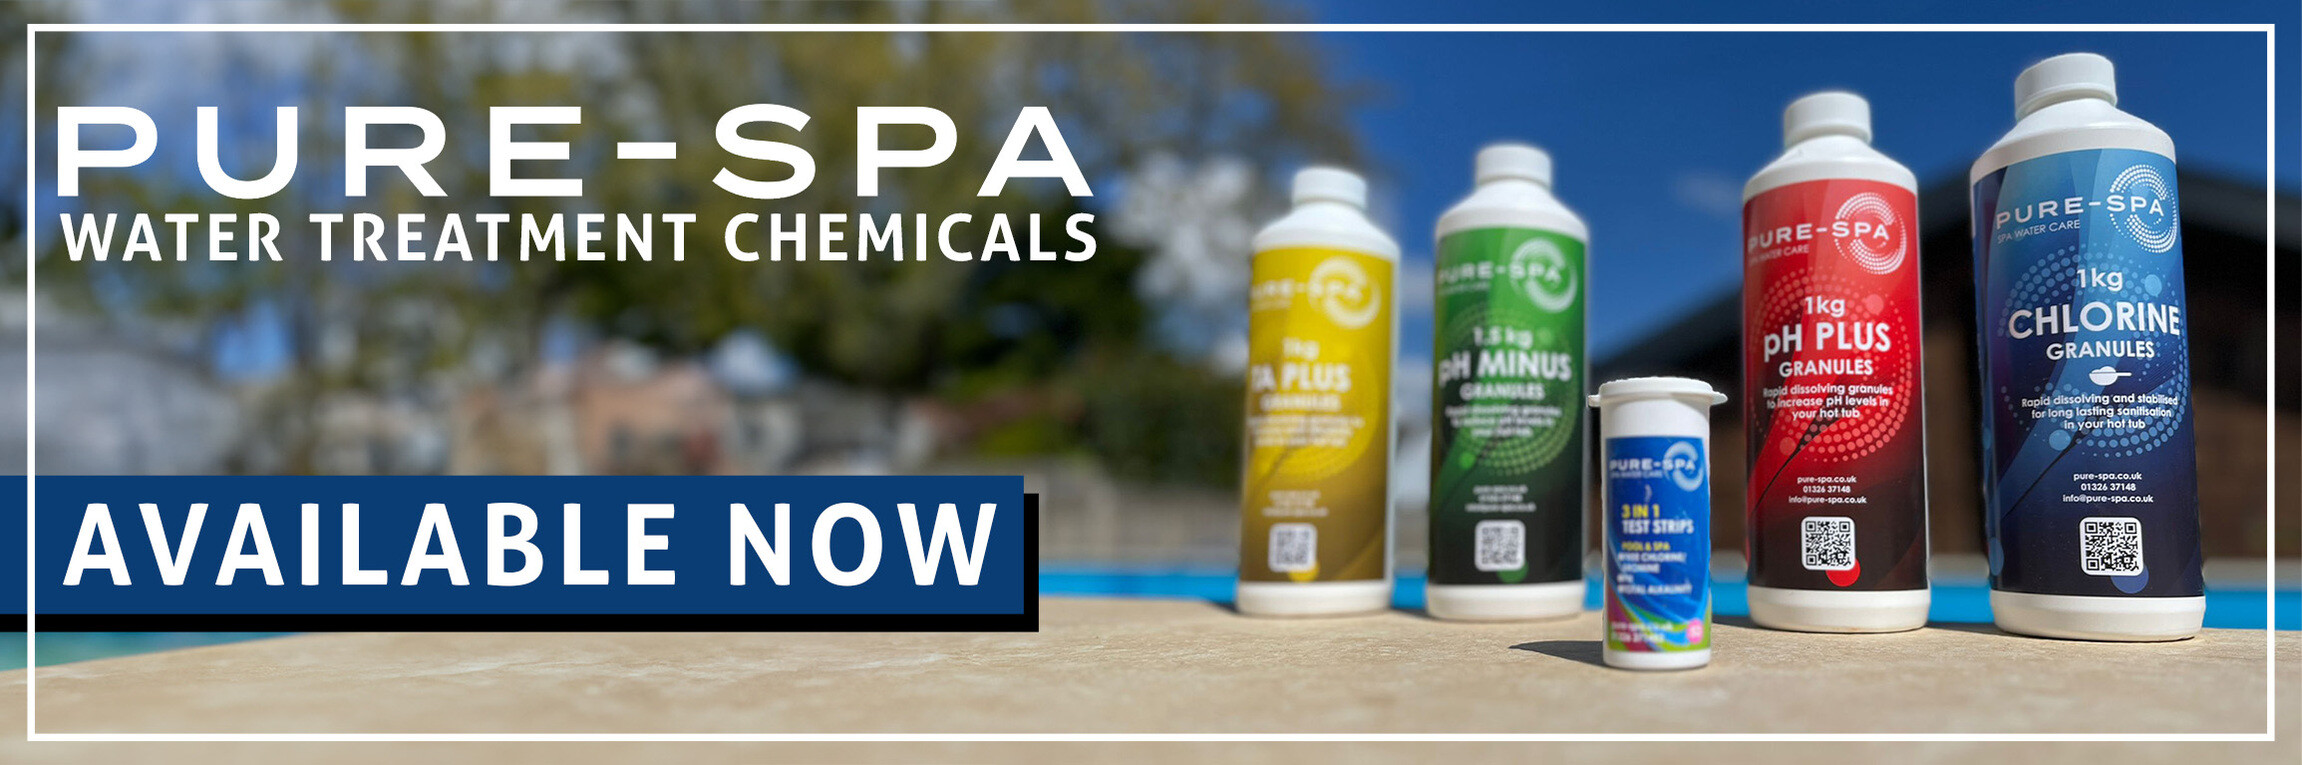 Pure-Spa Chemicals